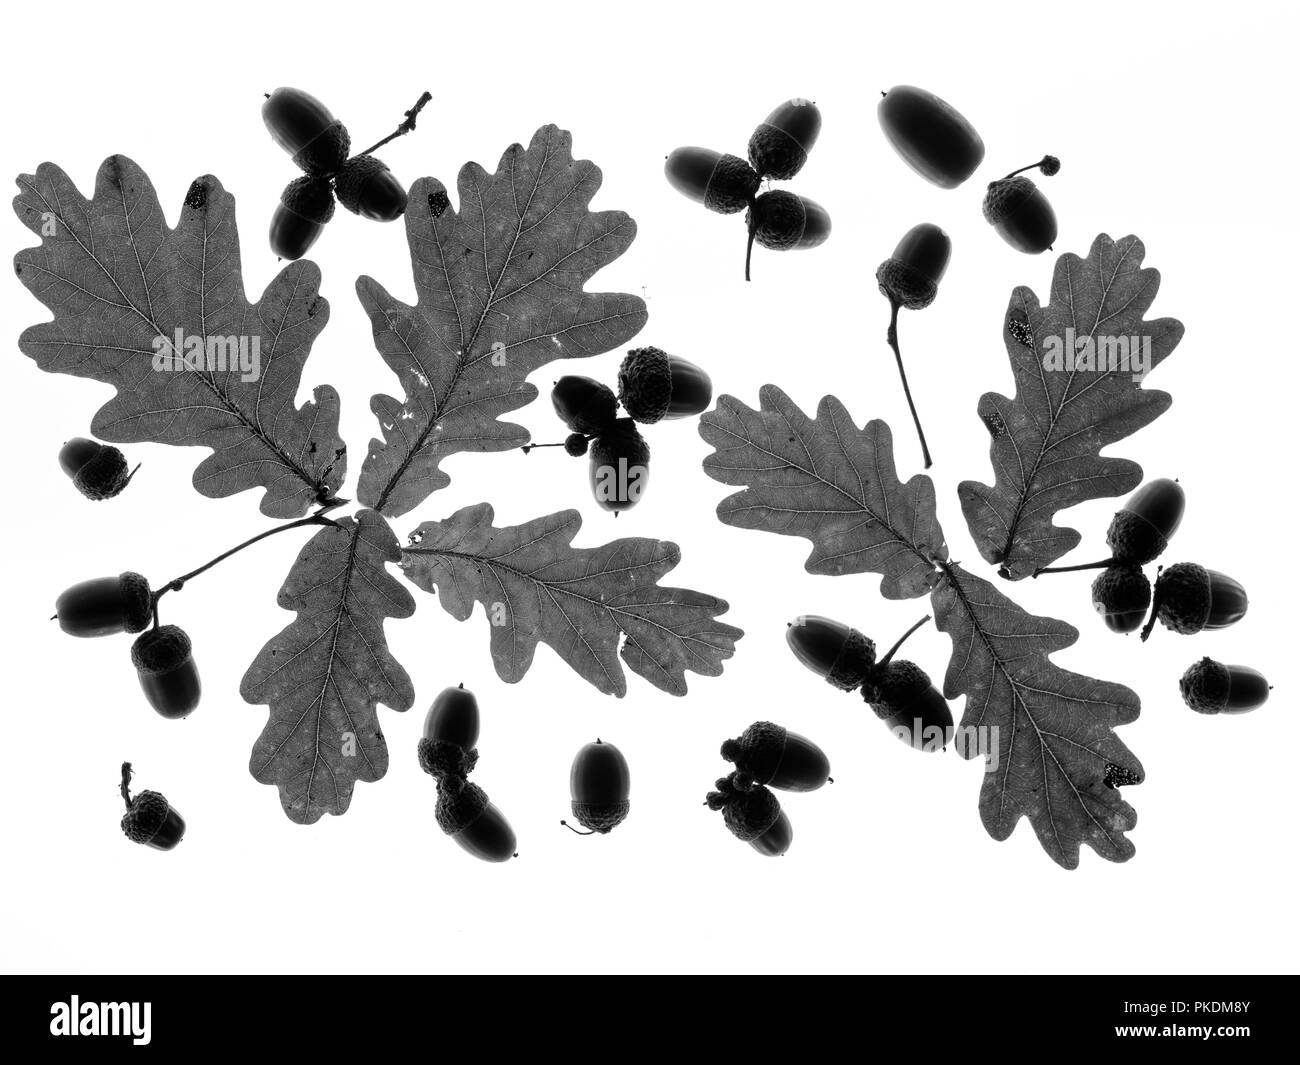 Oak  Quercus robur acorns and leaves in graphic pattern Stock Photo